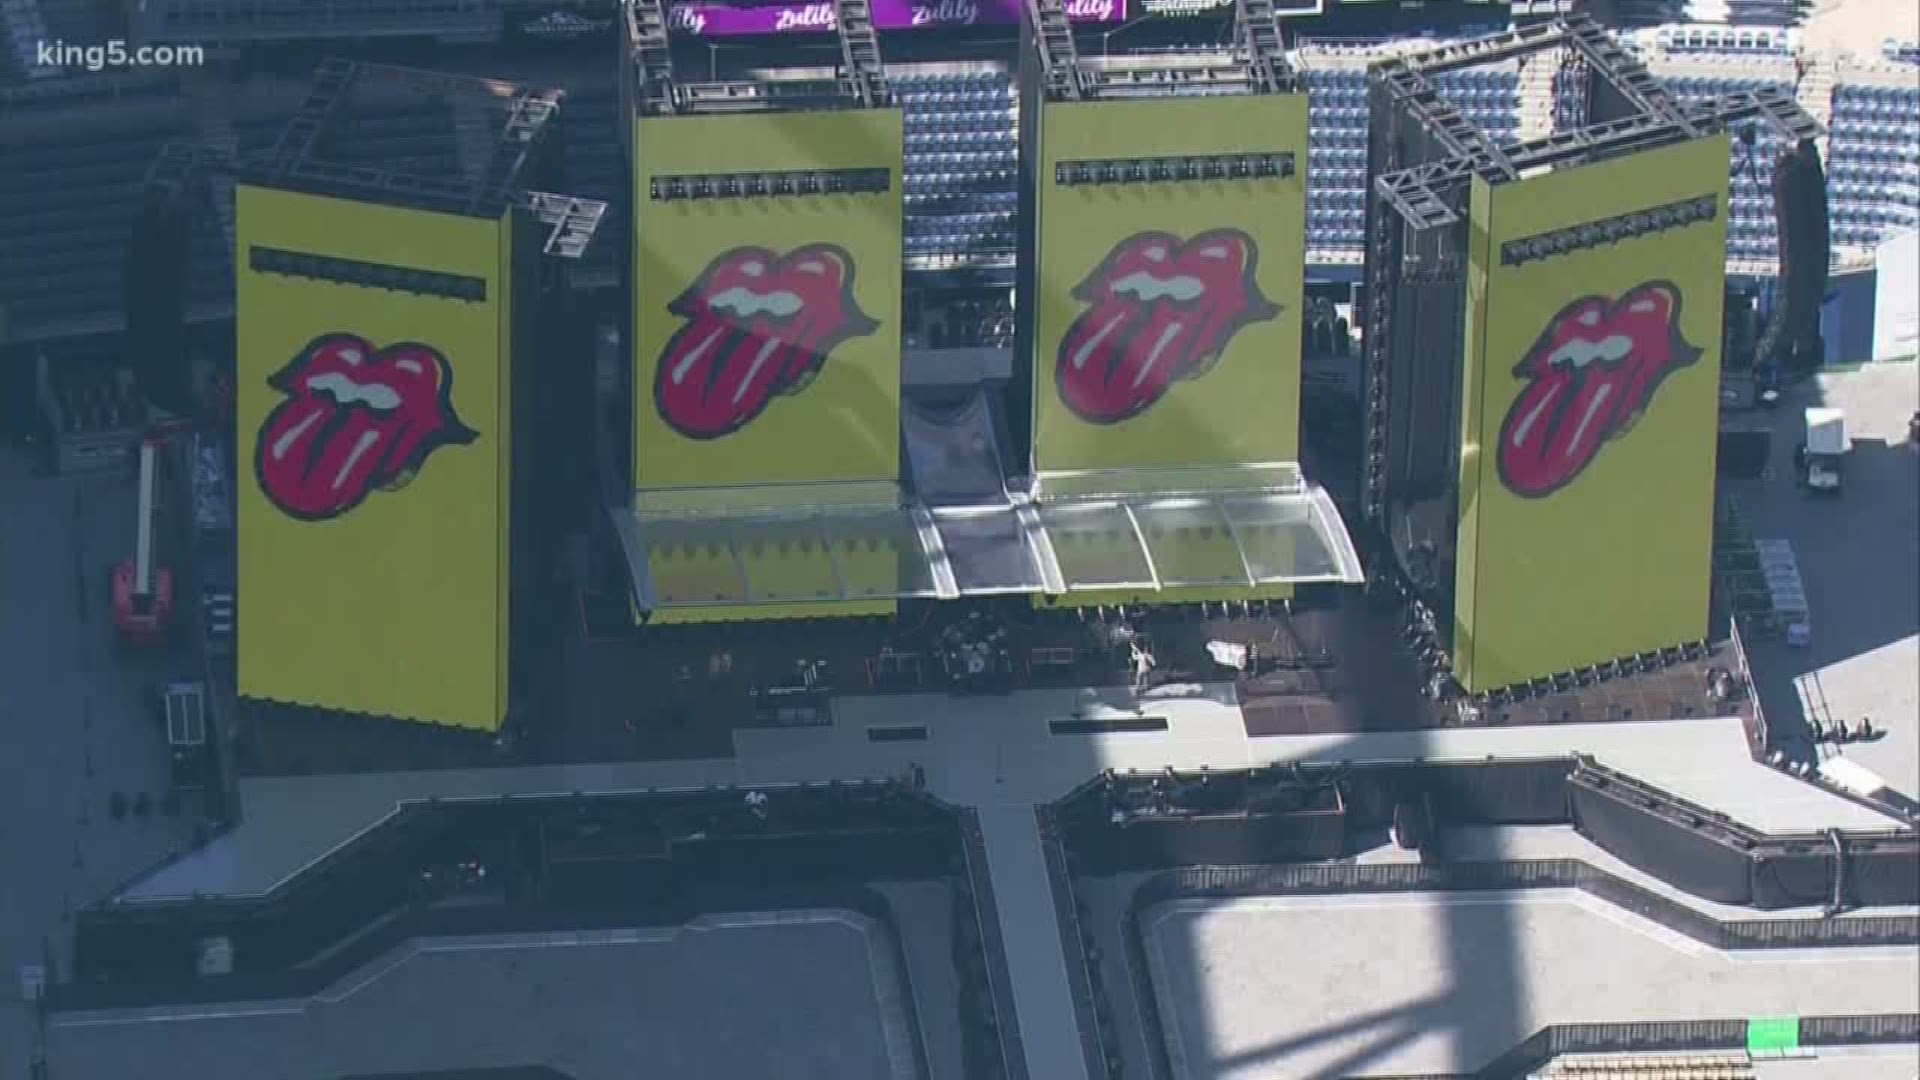 Fans flock to Seattle for The Rolling Stones 'No Filter Tour'